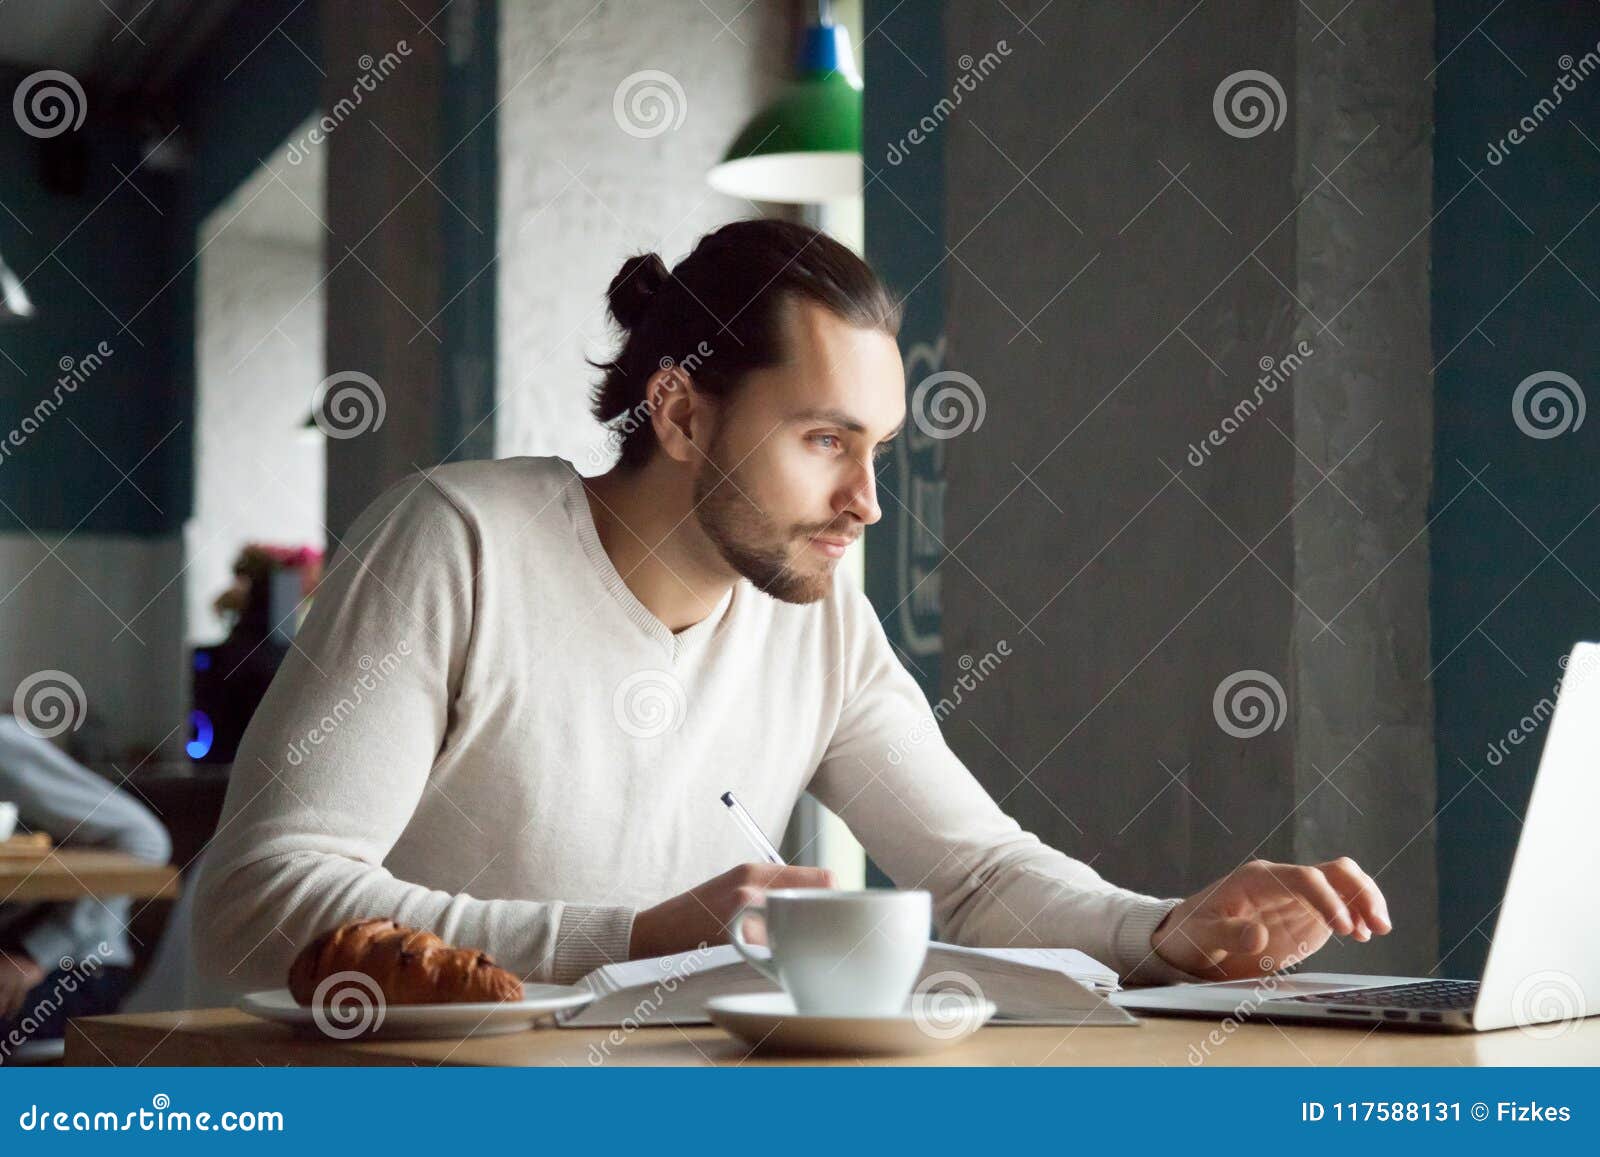 focused man writing notes learning online with laptop in cafe